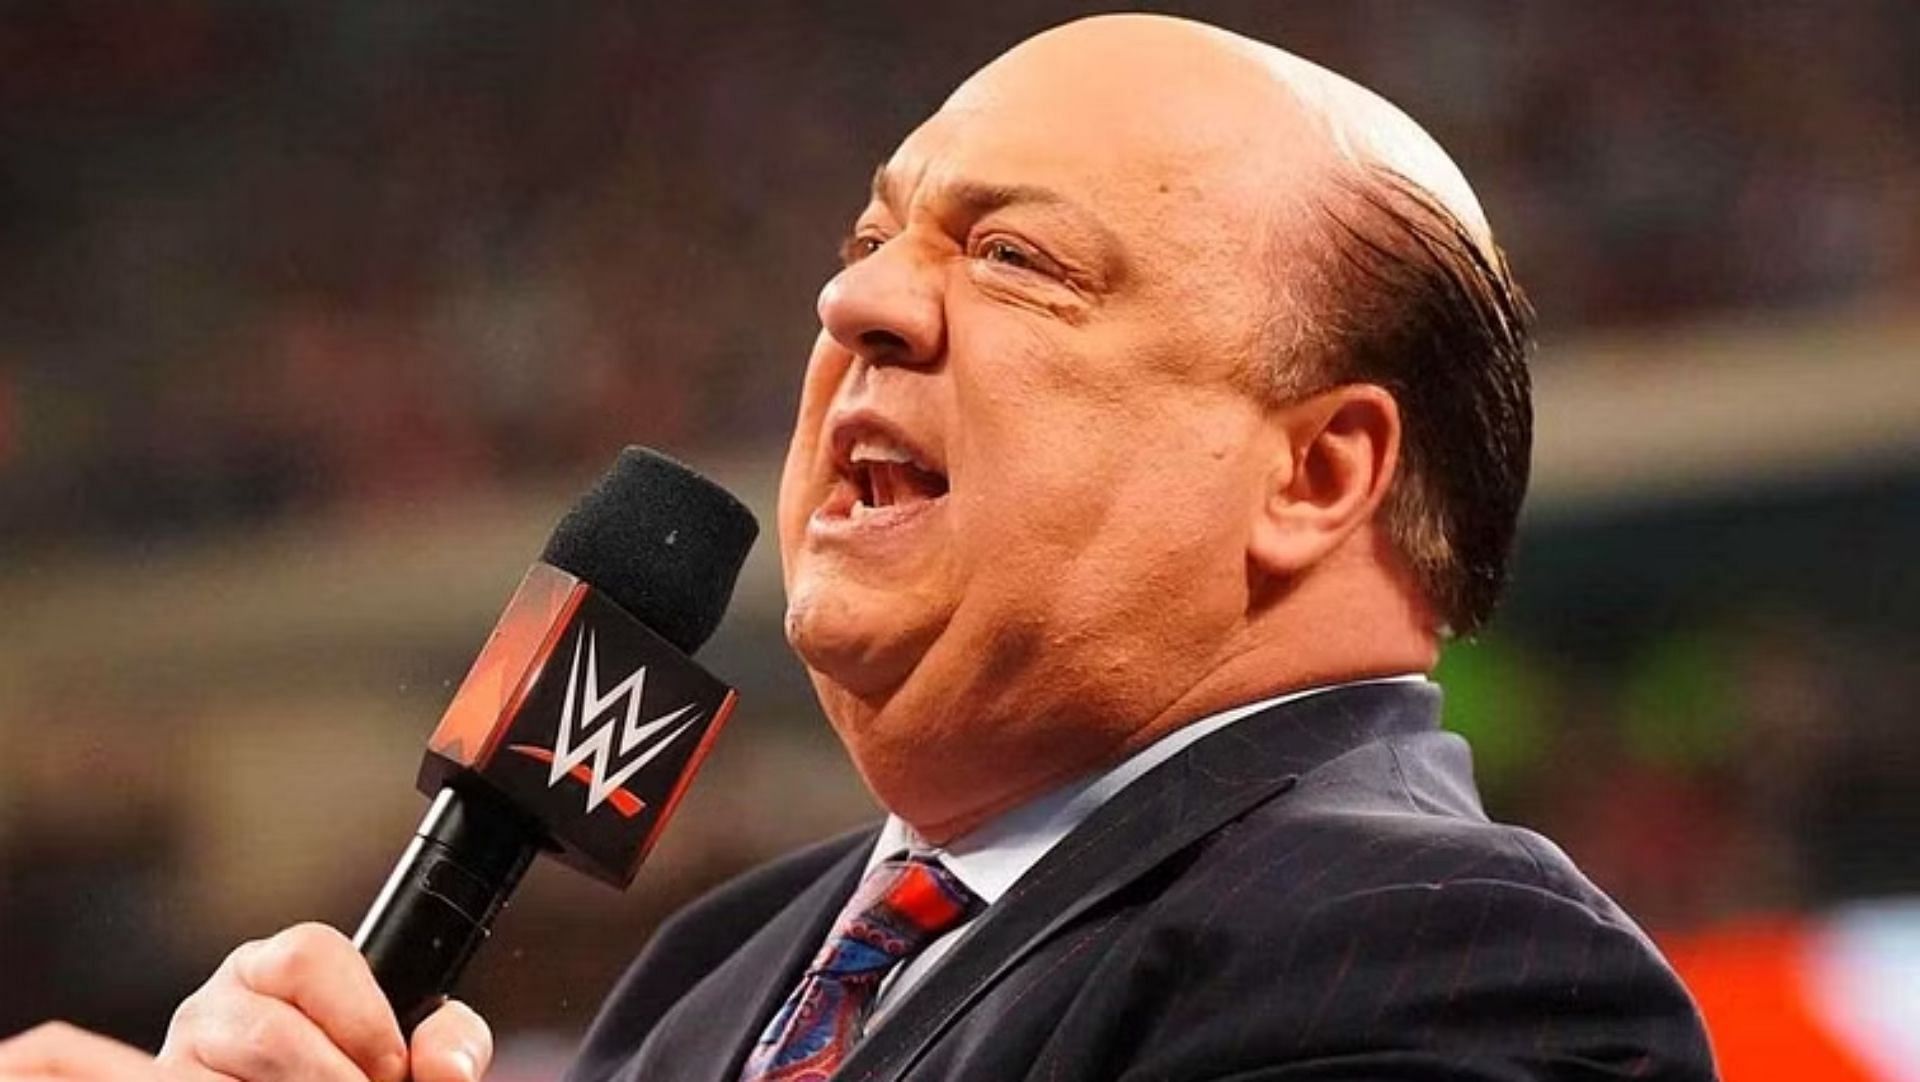 Paul Heyman is special counsel to Roman Reigns.